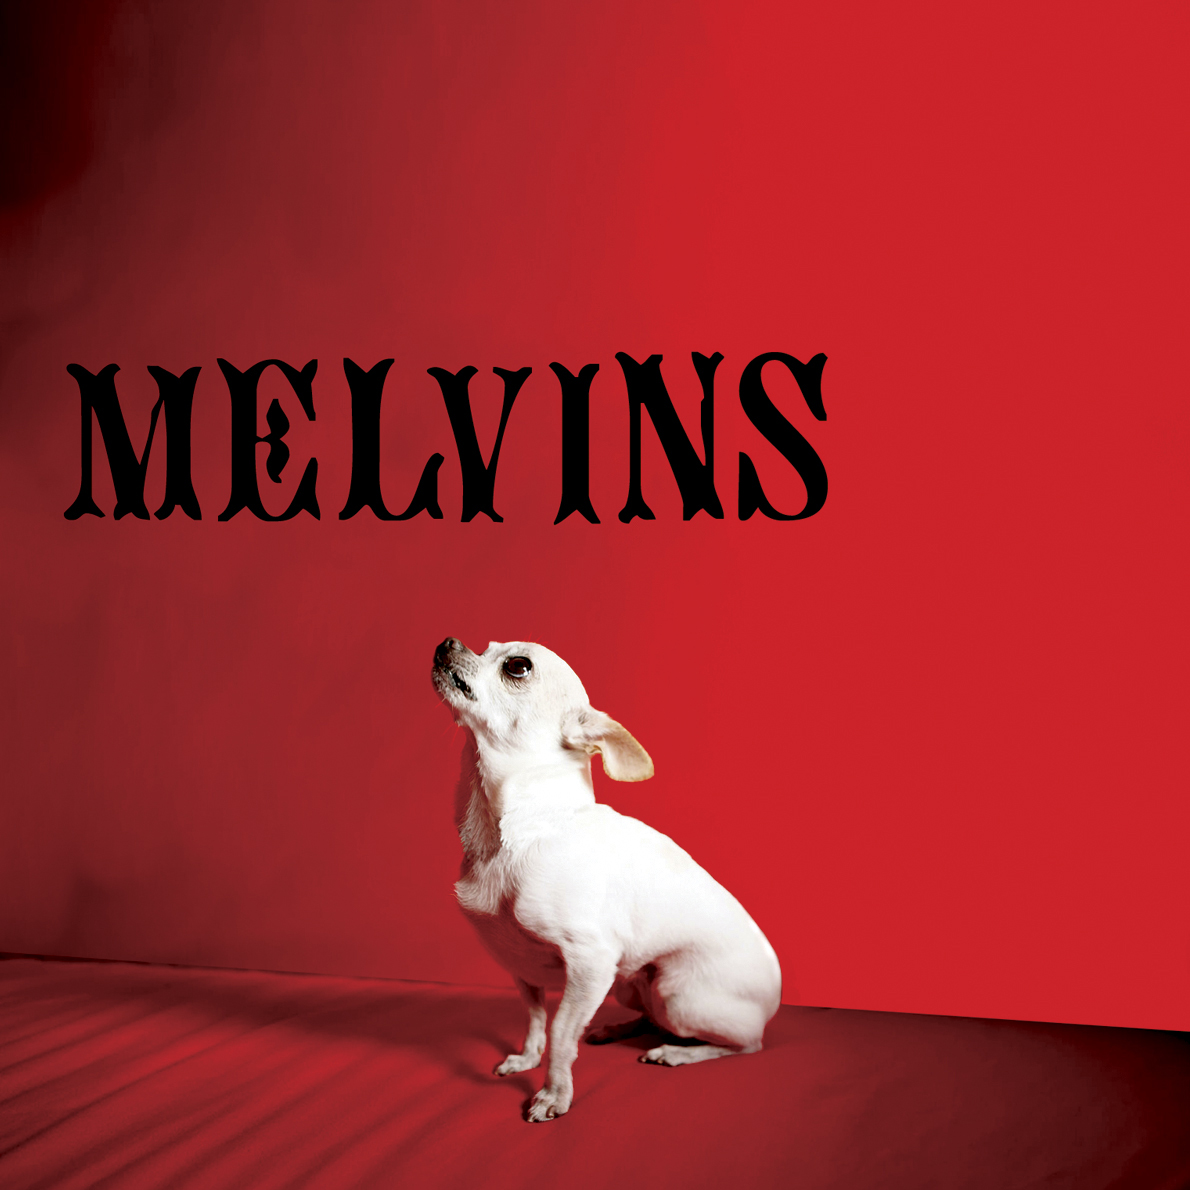 Melvins nude with boots cover.jpg